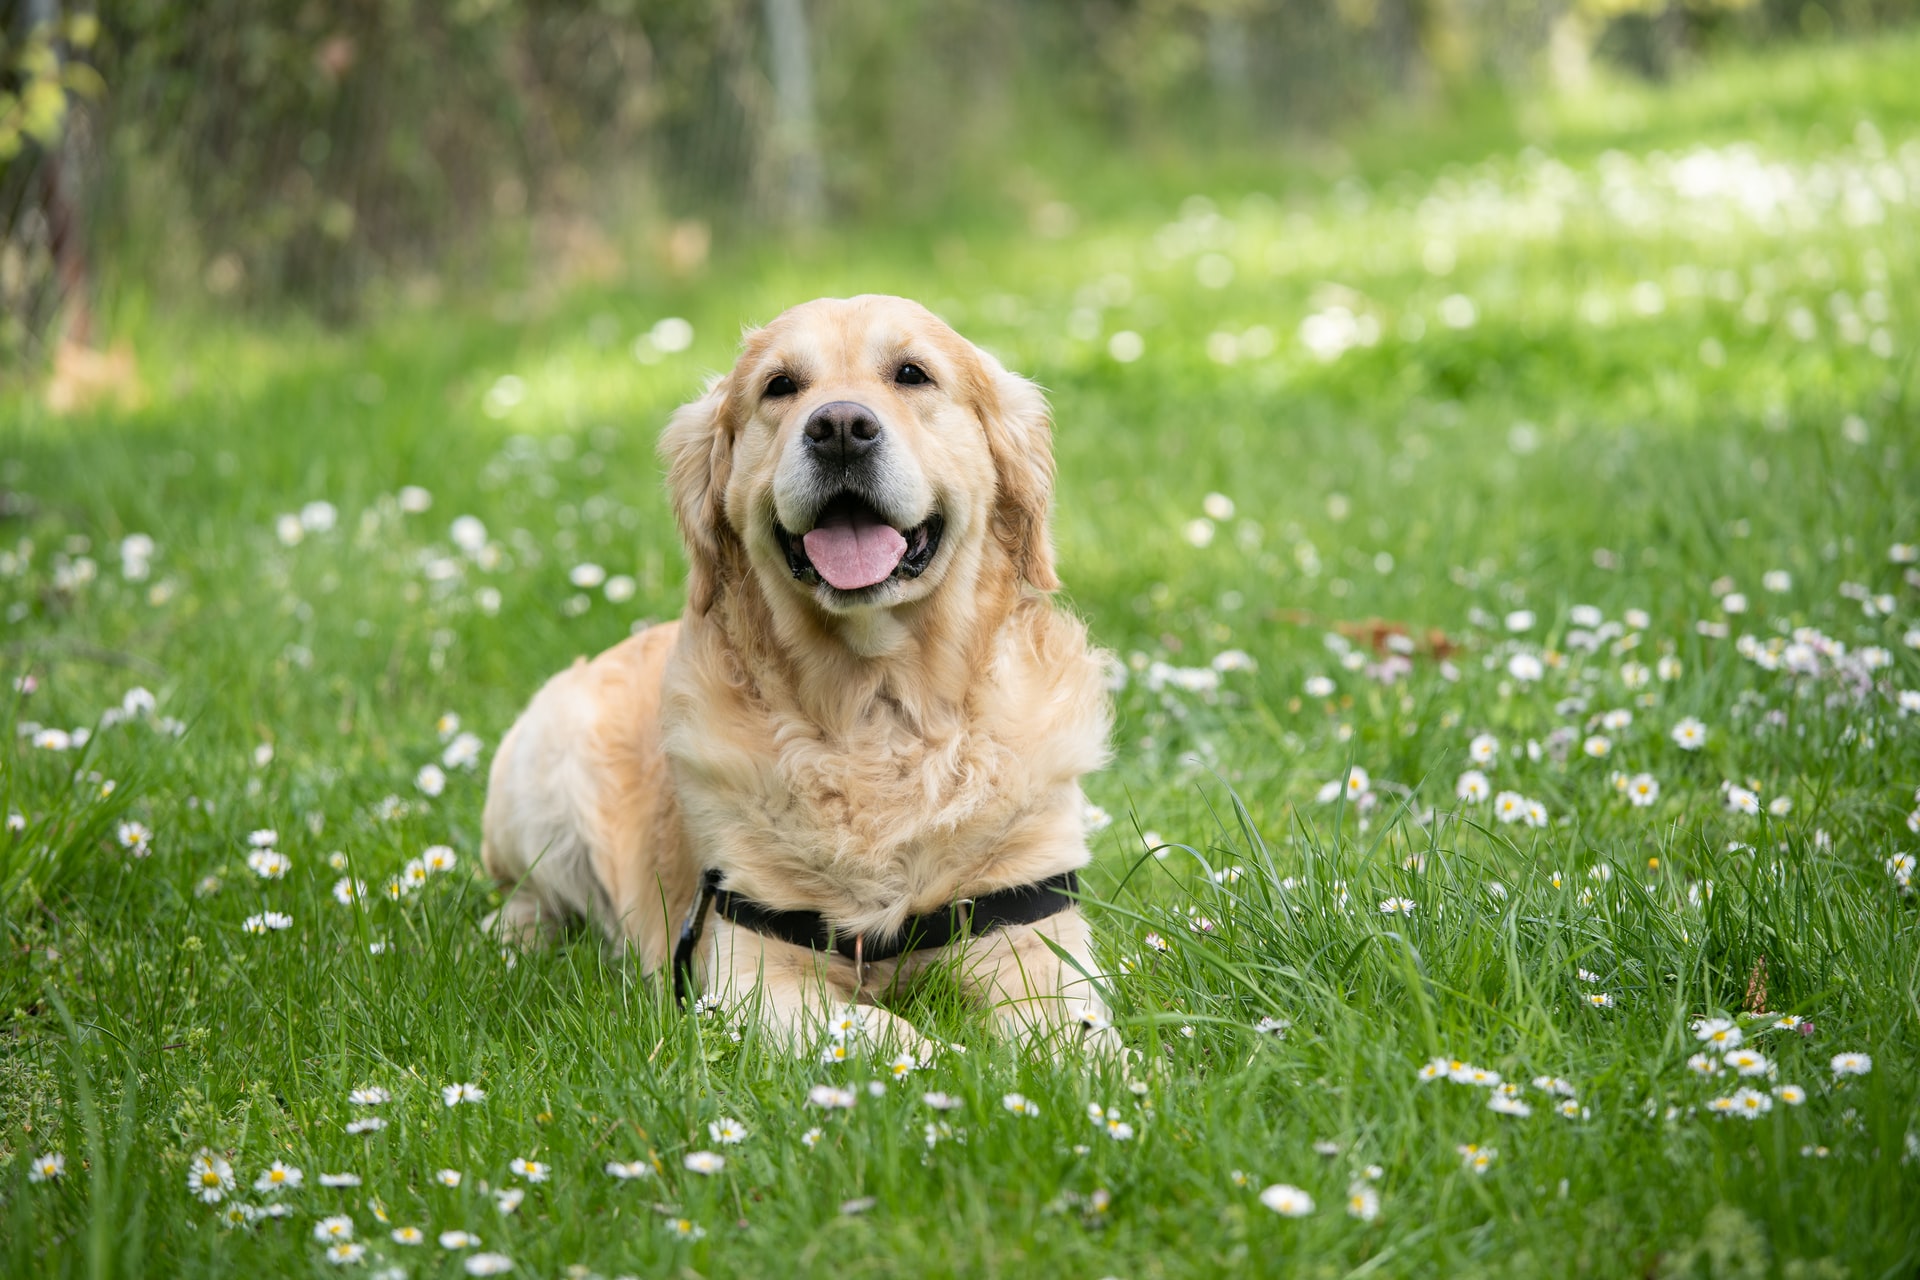 Make Your Dog Live Happier — 15 Things You Can Start Doing Today